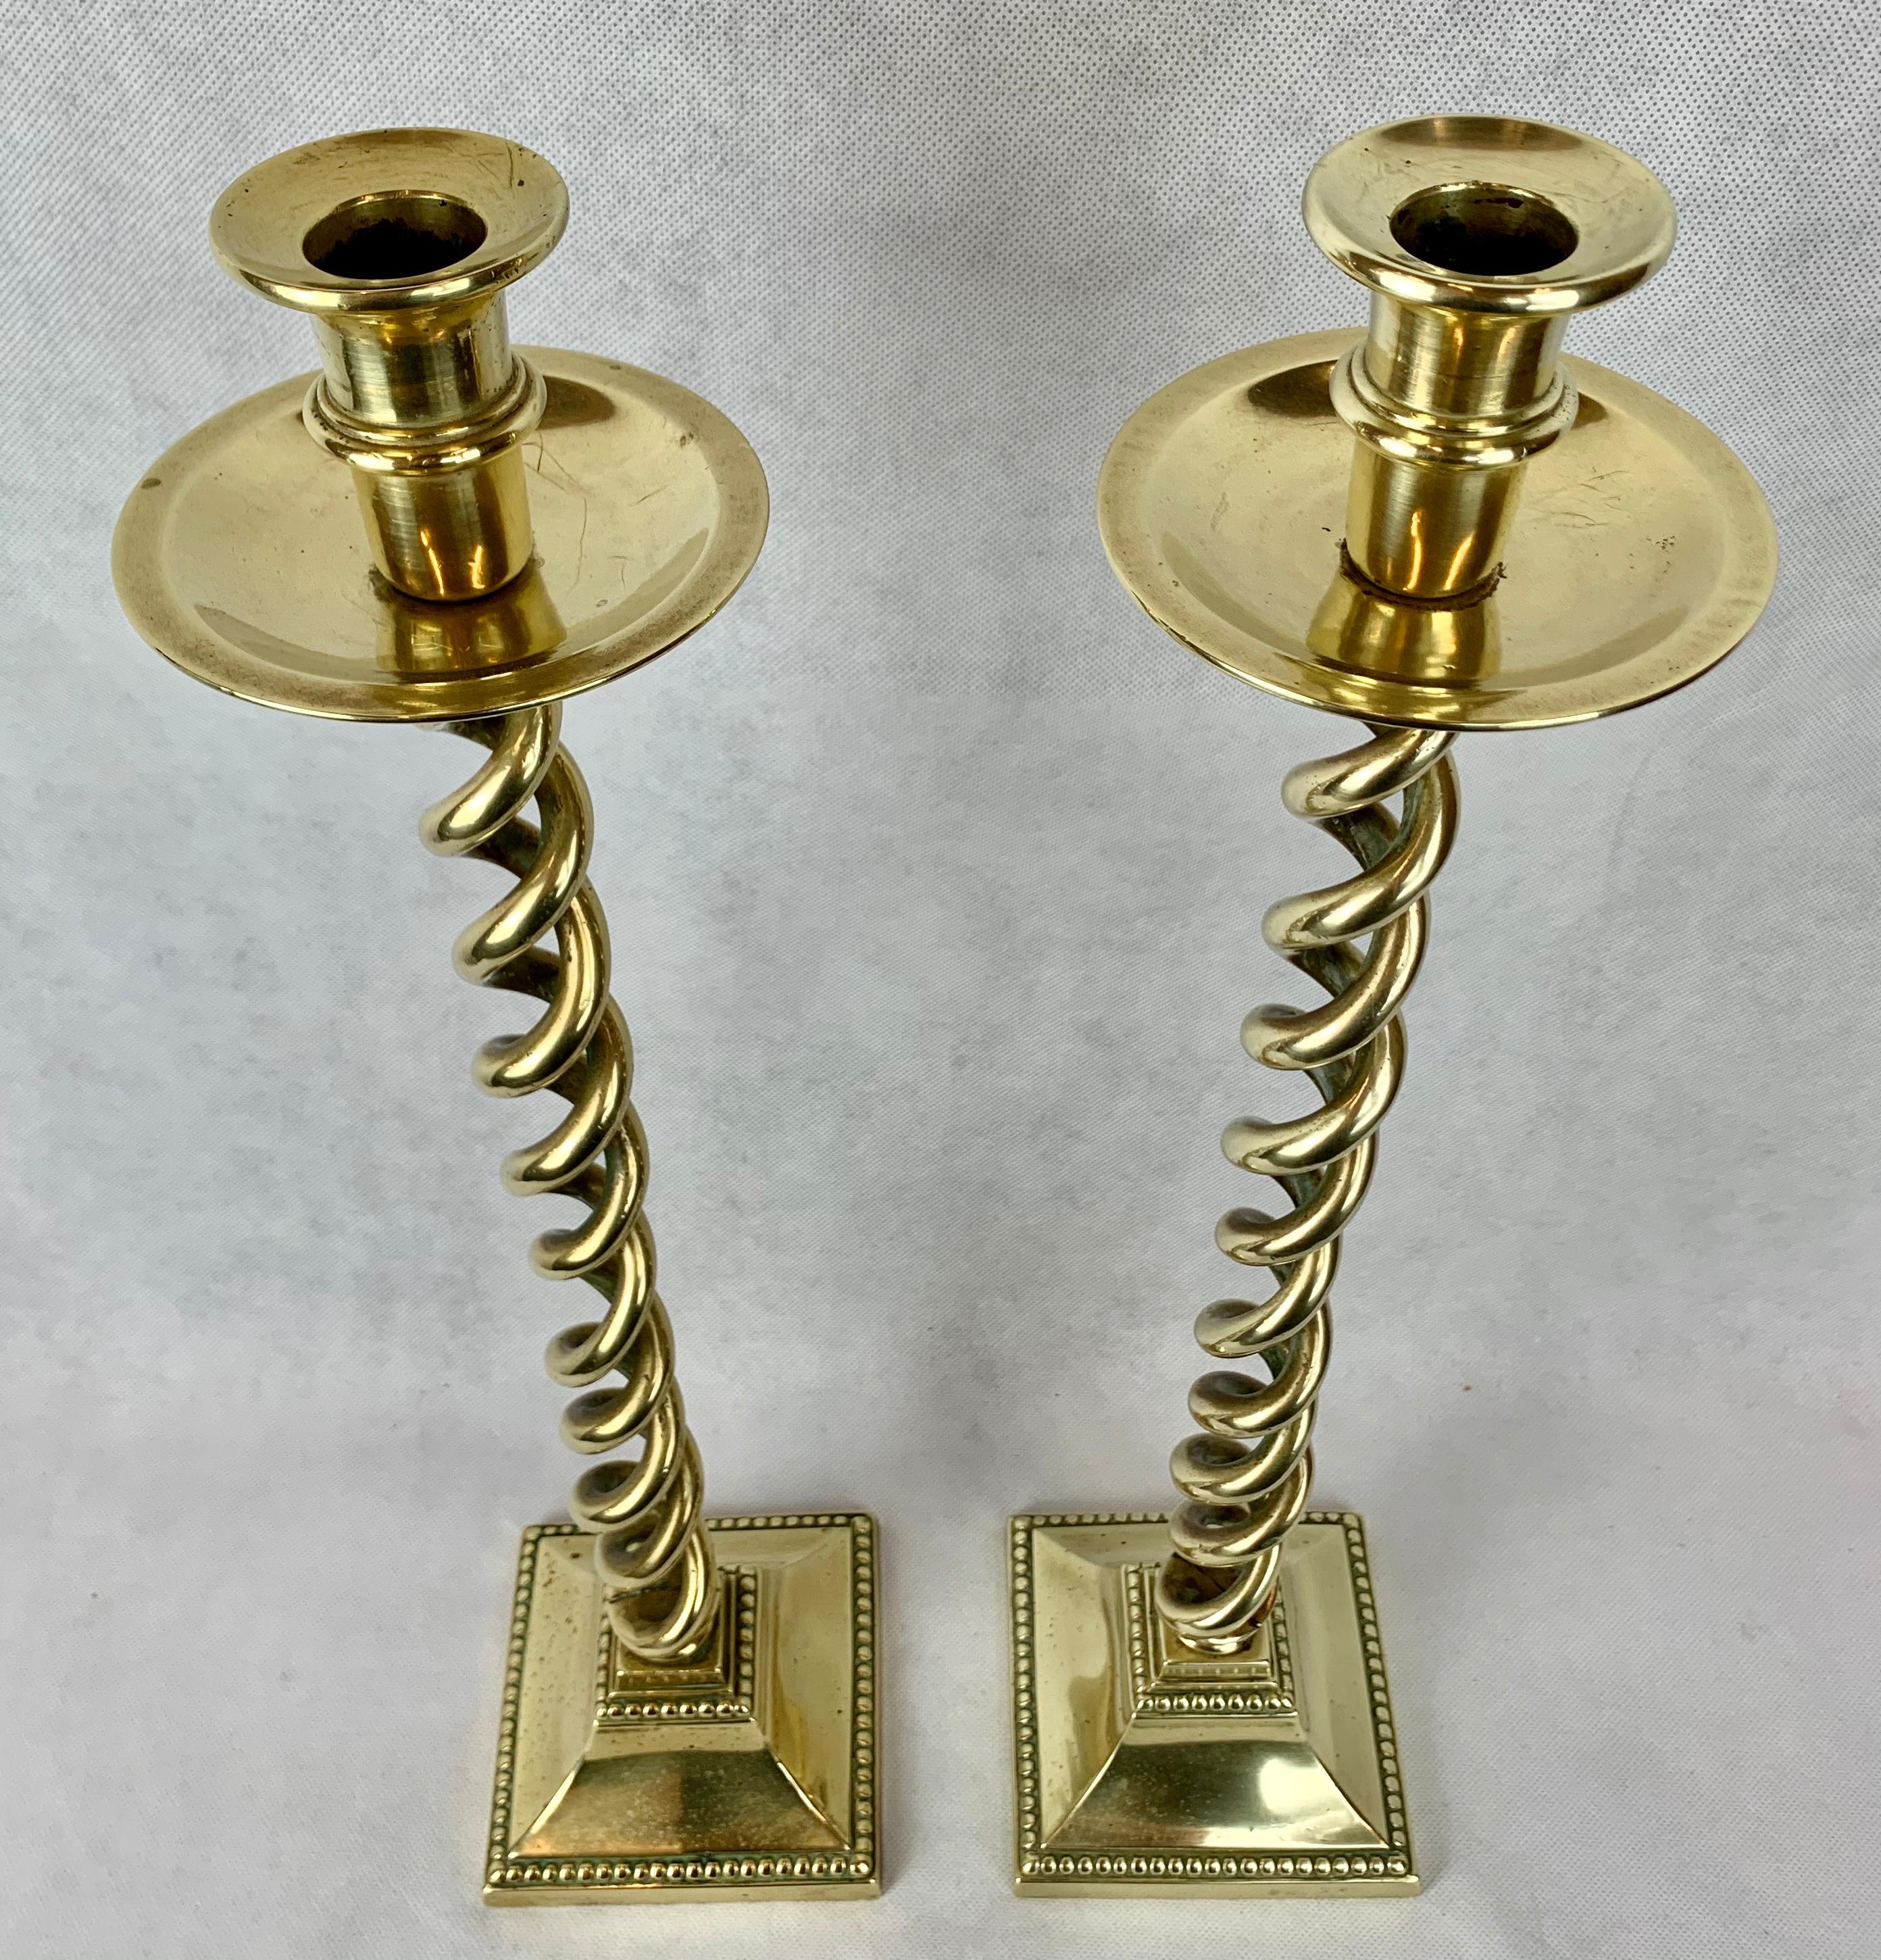 English Solid Brass 21” Barley Twist Candlesticks with Square Bases, England, 19th c.